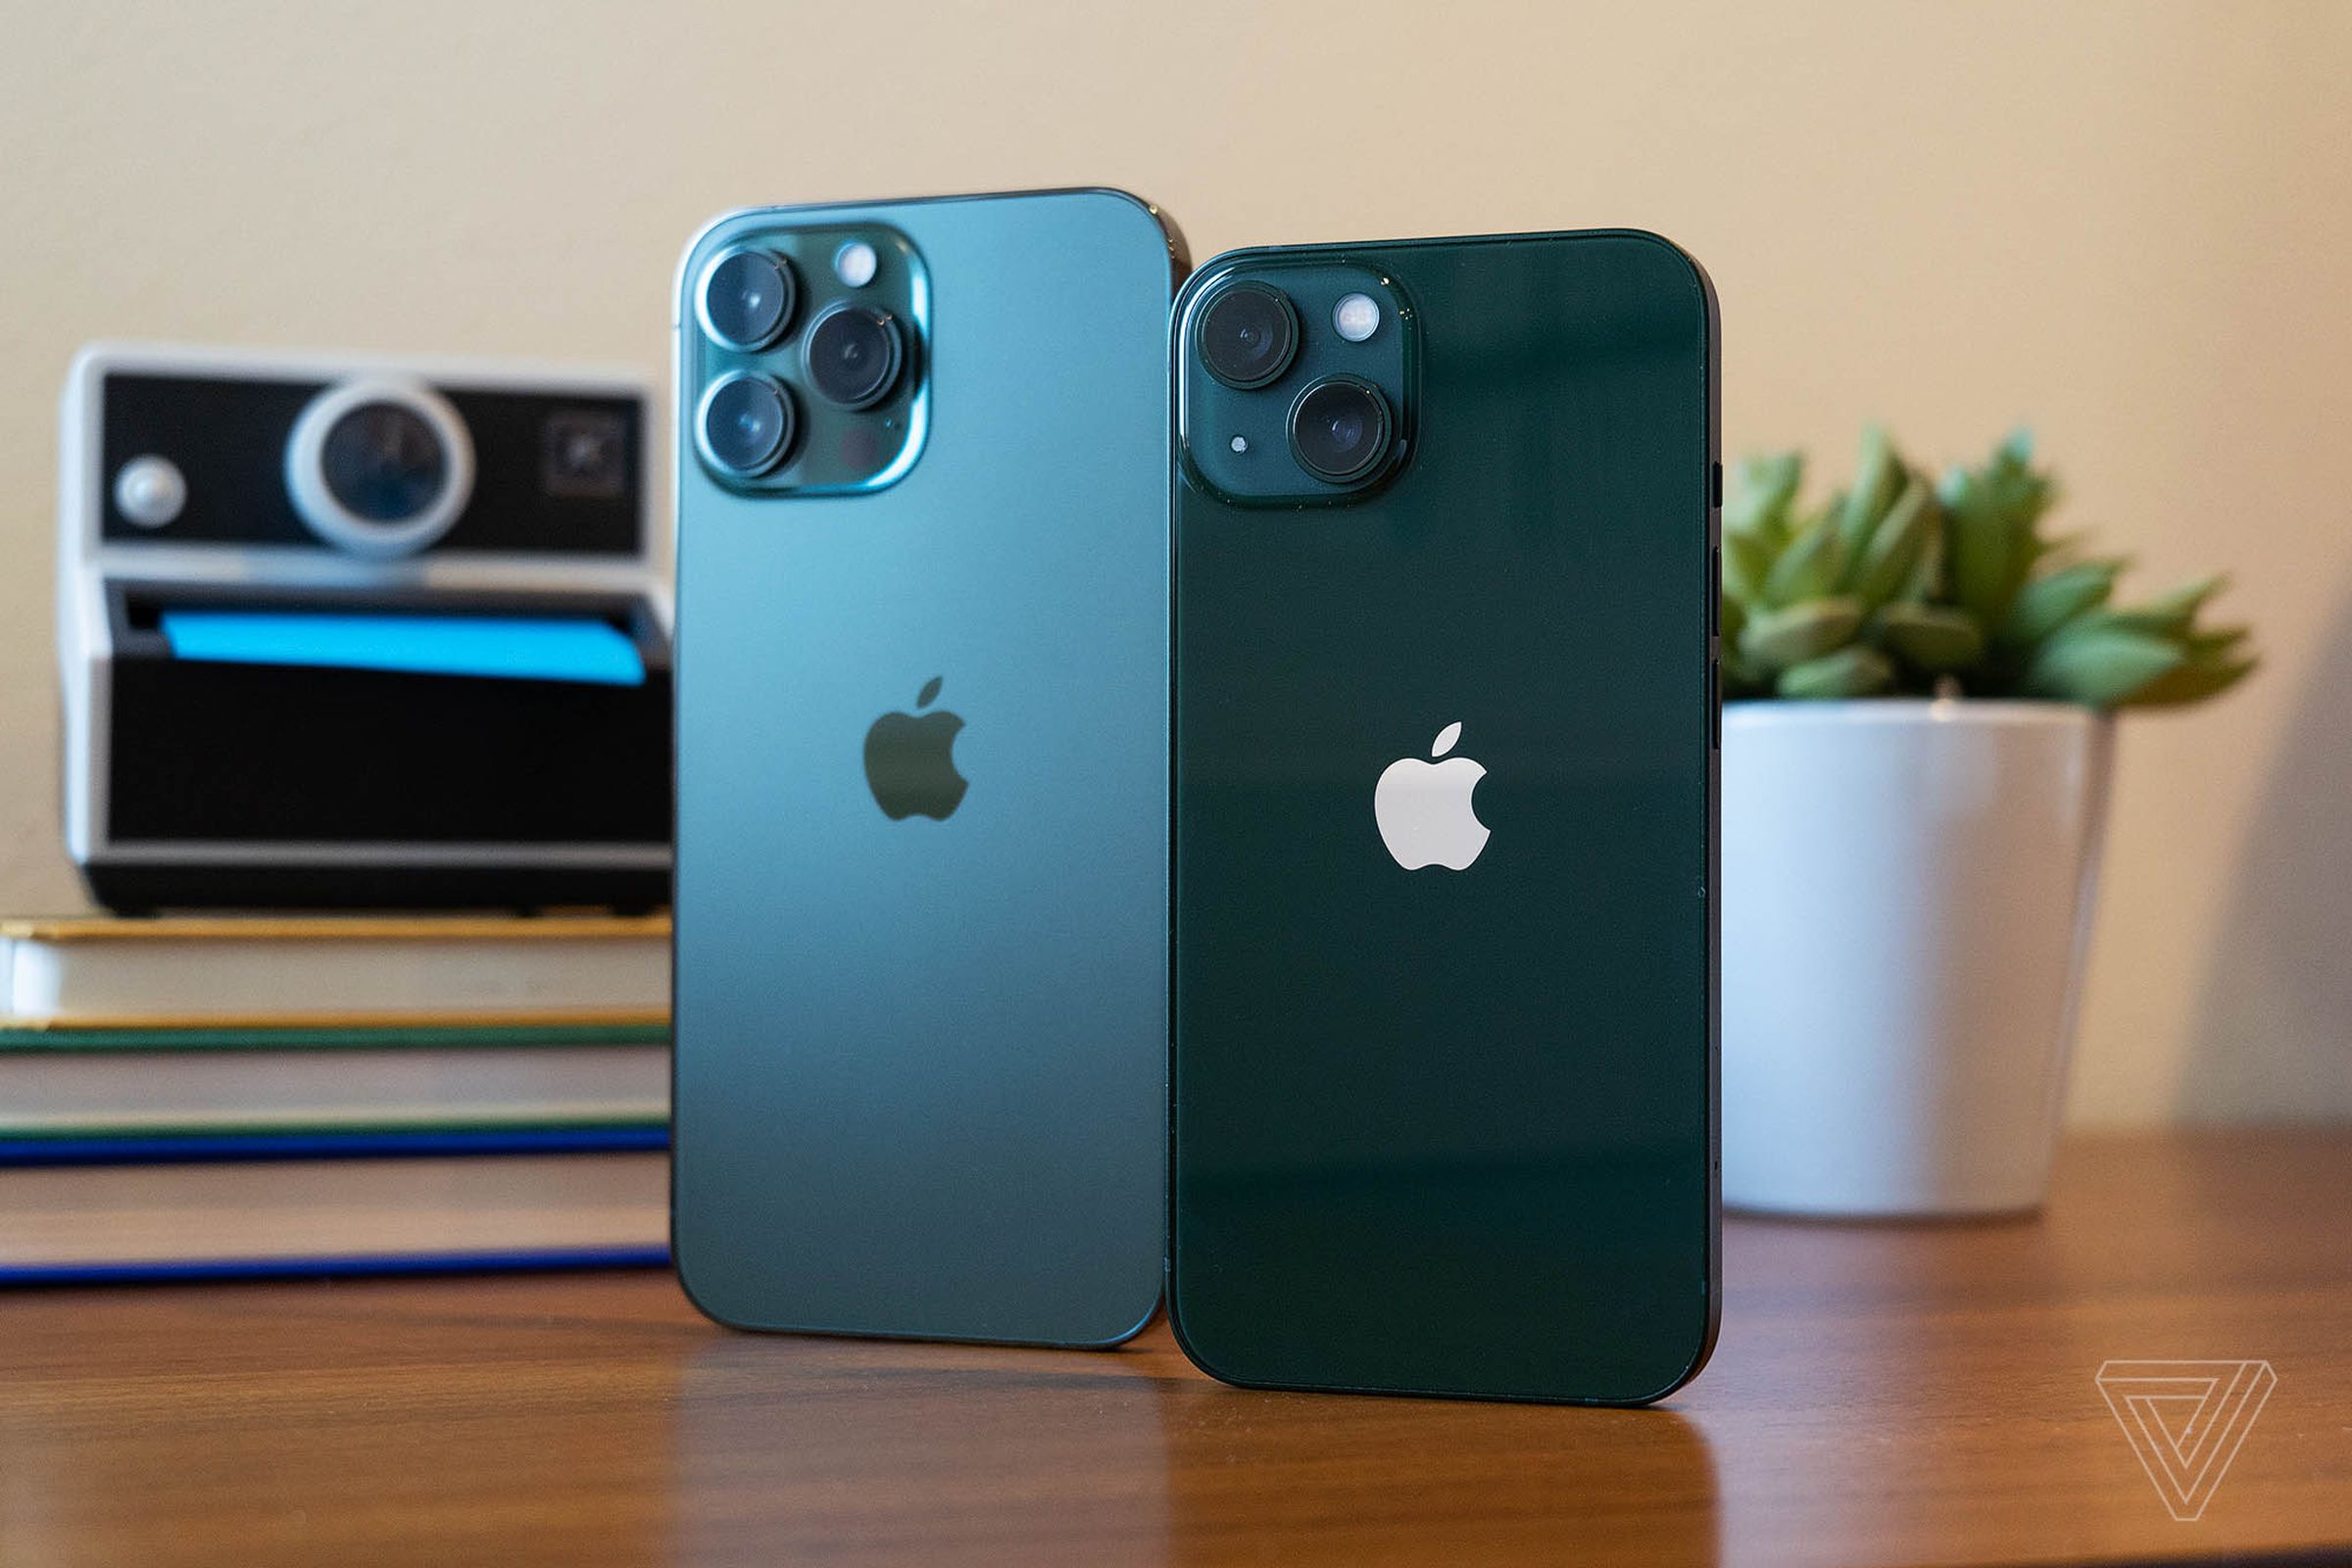 “Alpine green” on the left, and just “green” on the right.